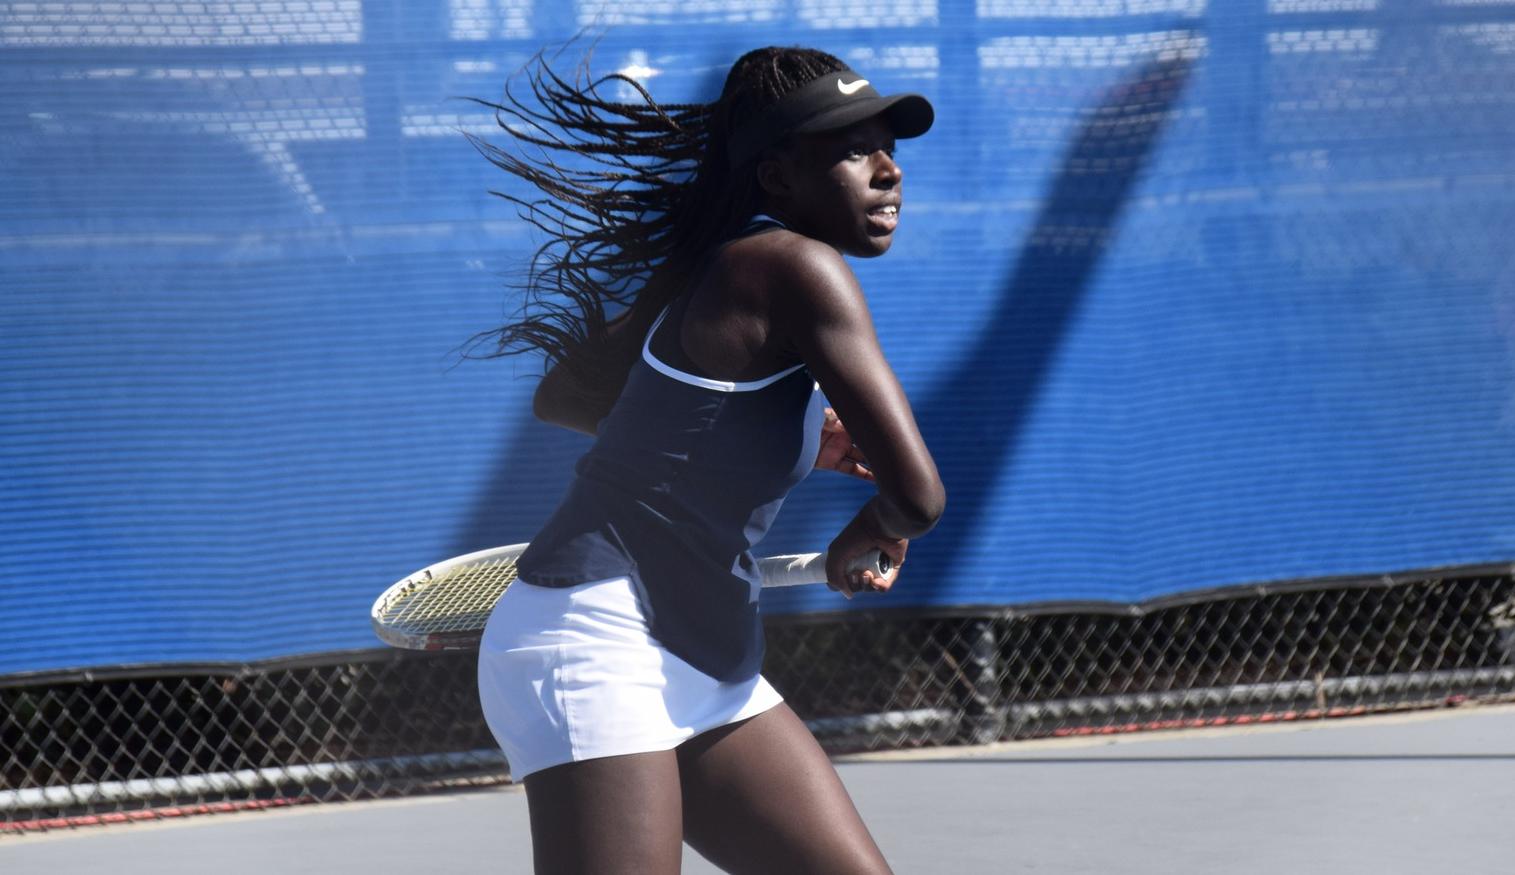 Women's tennis team finishes strong to beat Fullerton